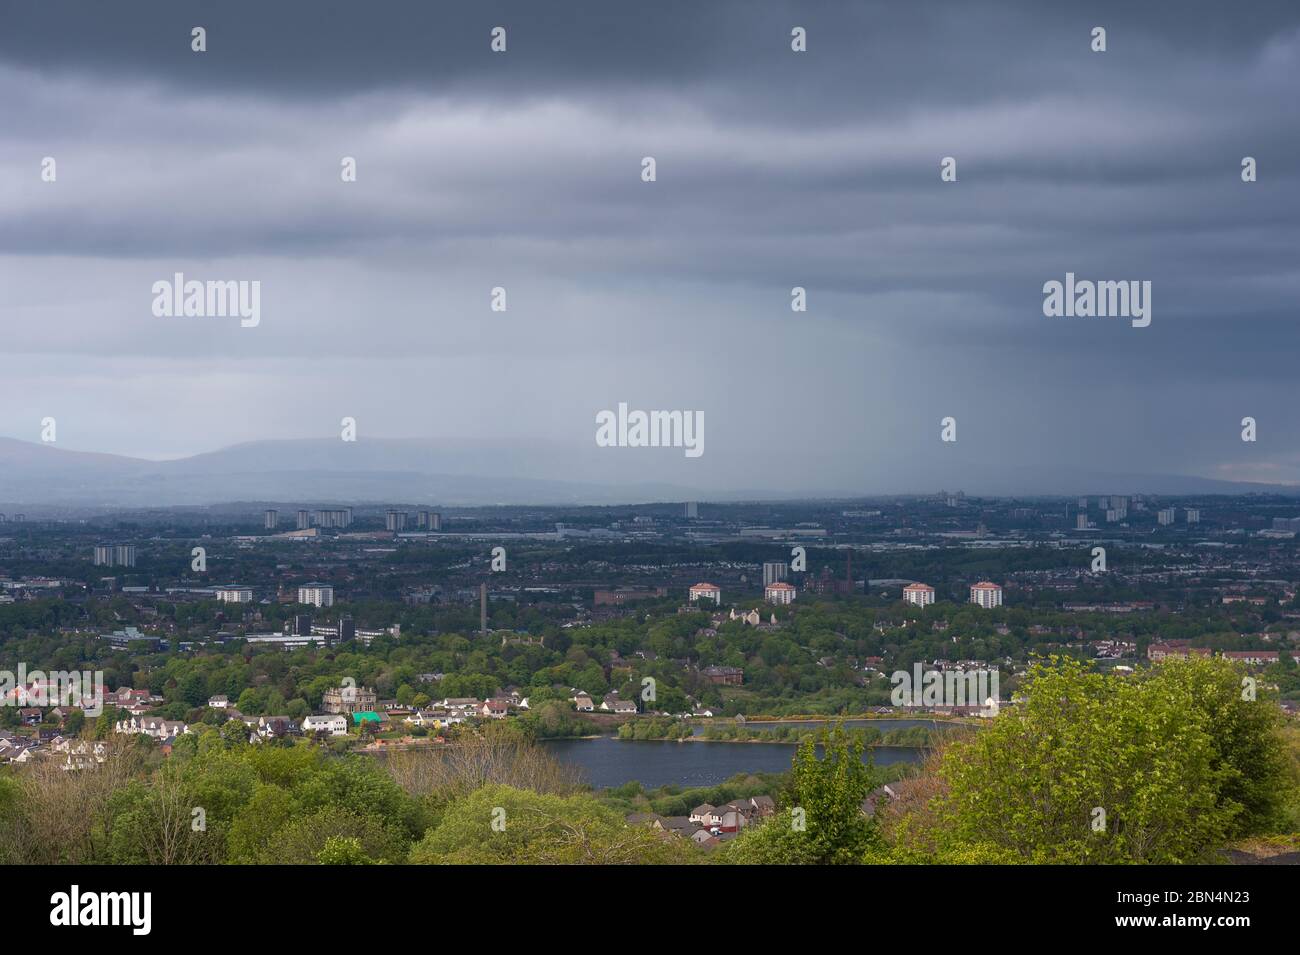 Glasgow Scotland Uk 12th May Pictured Looking North Over Glasgow With The Campsie Fells In The Background Surrounded By A Veil Of Rain And Dark Clouds With A Cloud Base Of